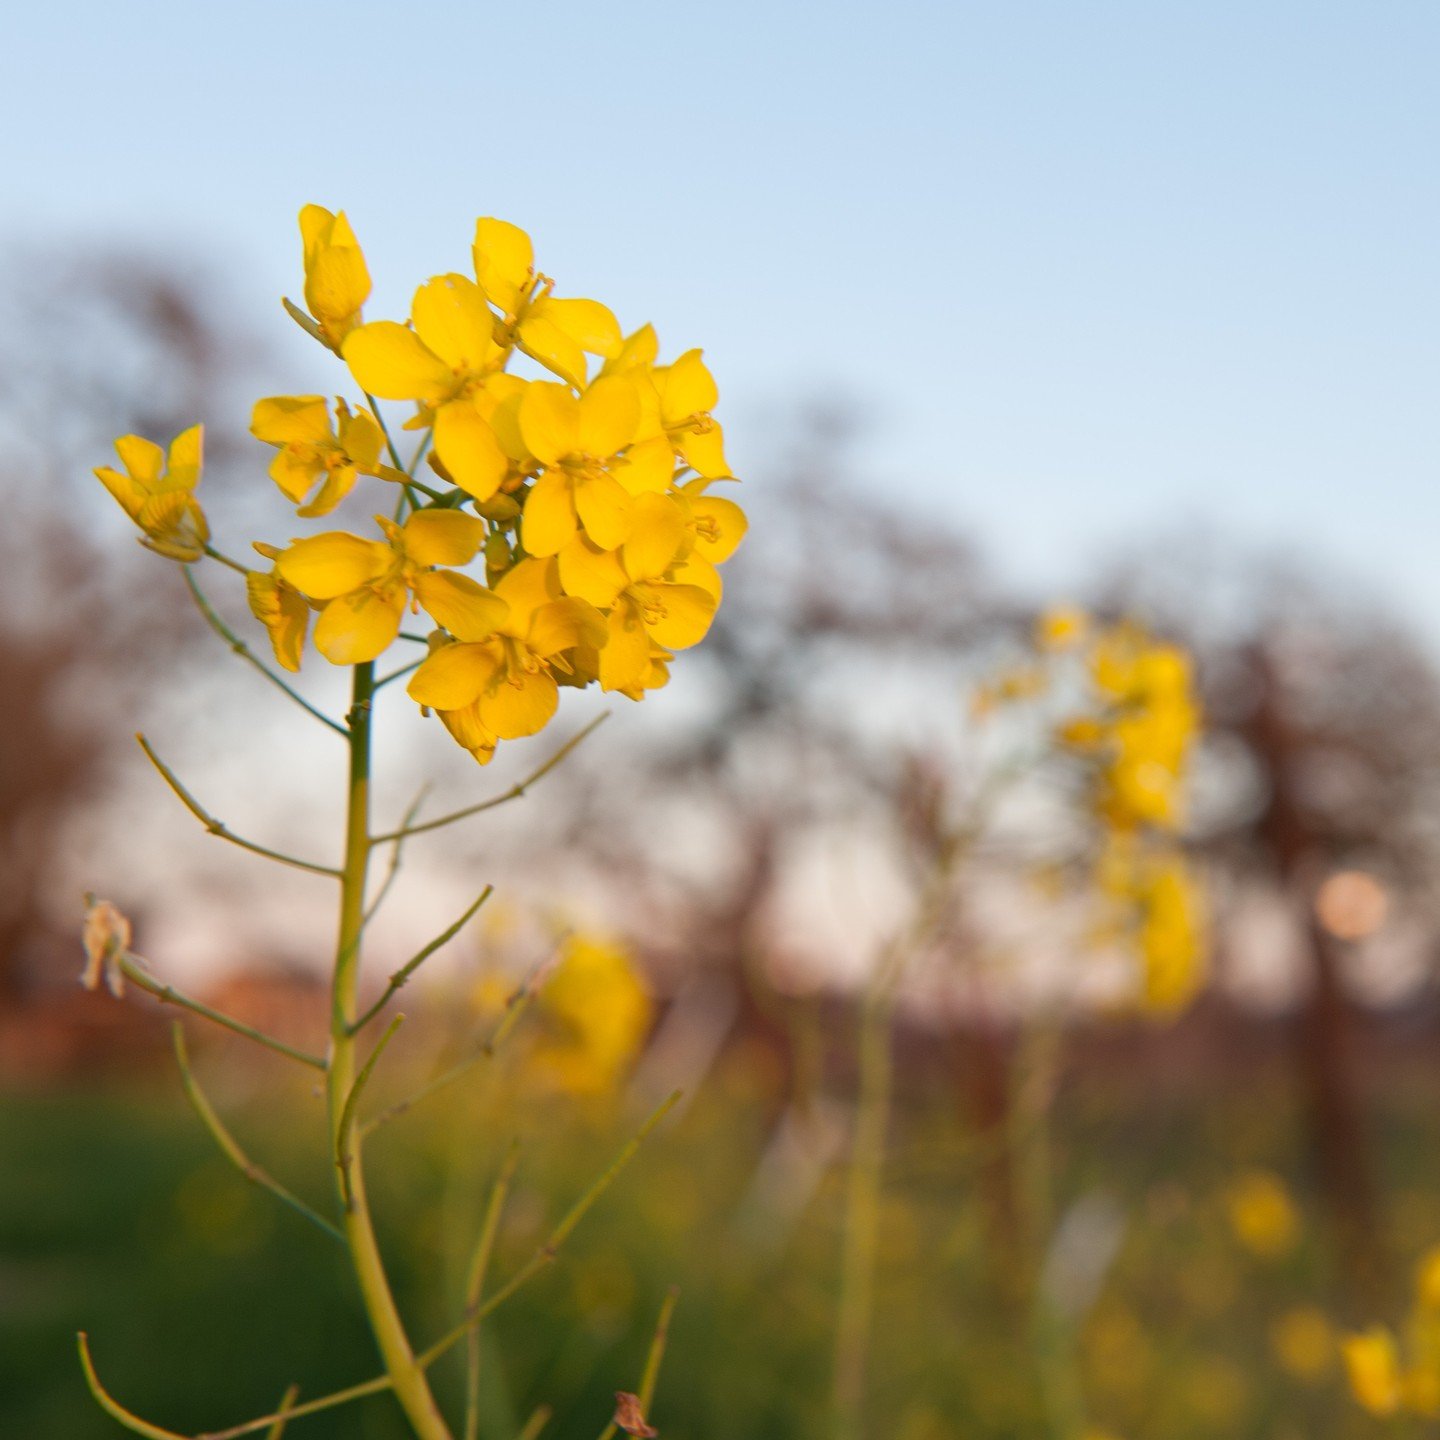 What kind of native wildflower is your favorite? Now that it's spring, it's the perfect time to give some appreciation to all the local plants that are budding up as we speak!

Mustard seeds are a sight for sore eyes for any visitors driving by Highw